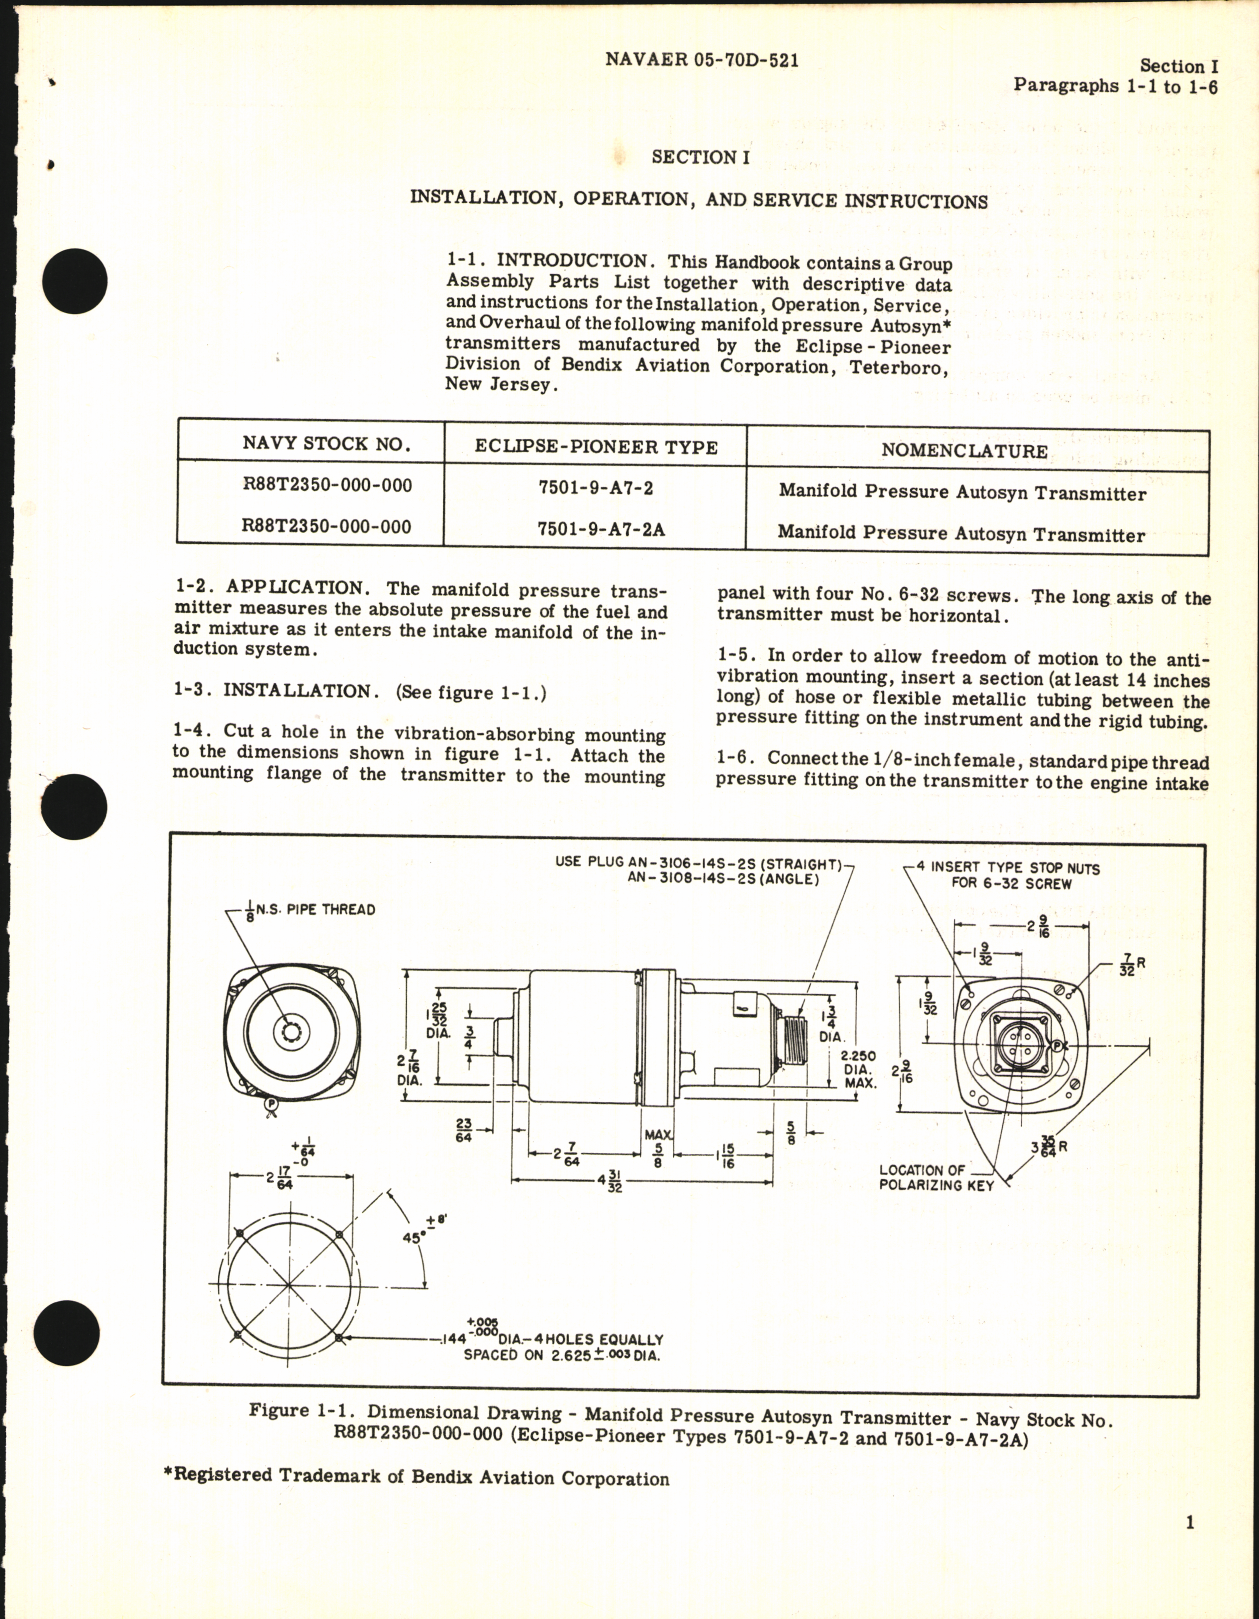 Sample page 5 from AirCorps Library document: Operation, Service, & Overhaul Inst w/ Parts Catalog for Manifold Pressure Transmitters